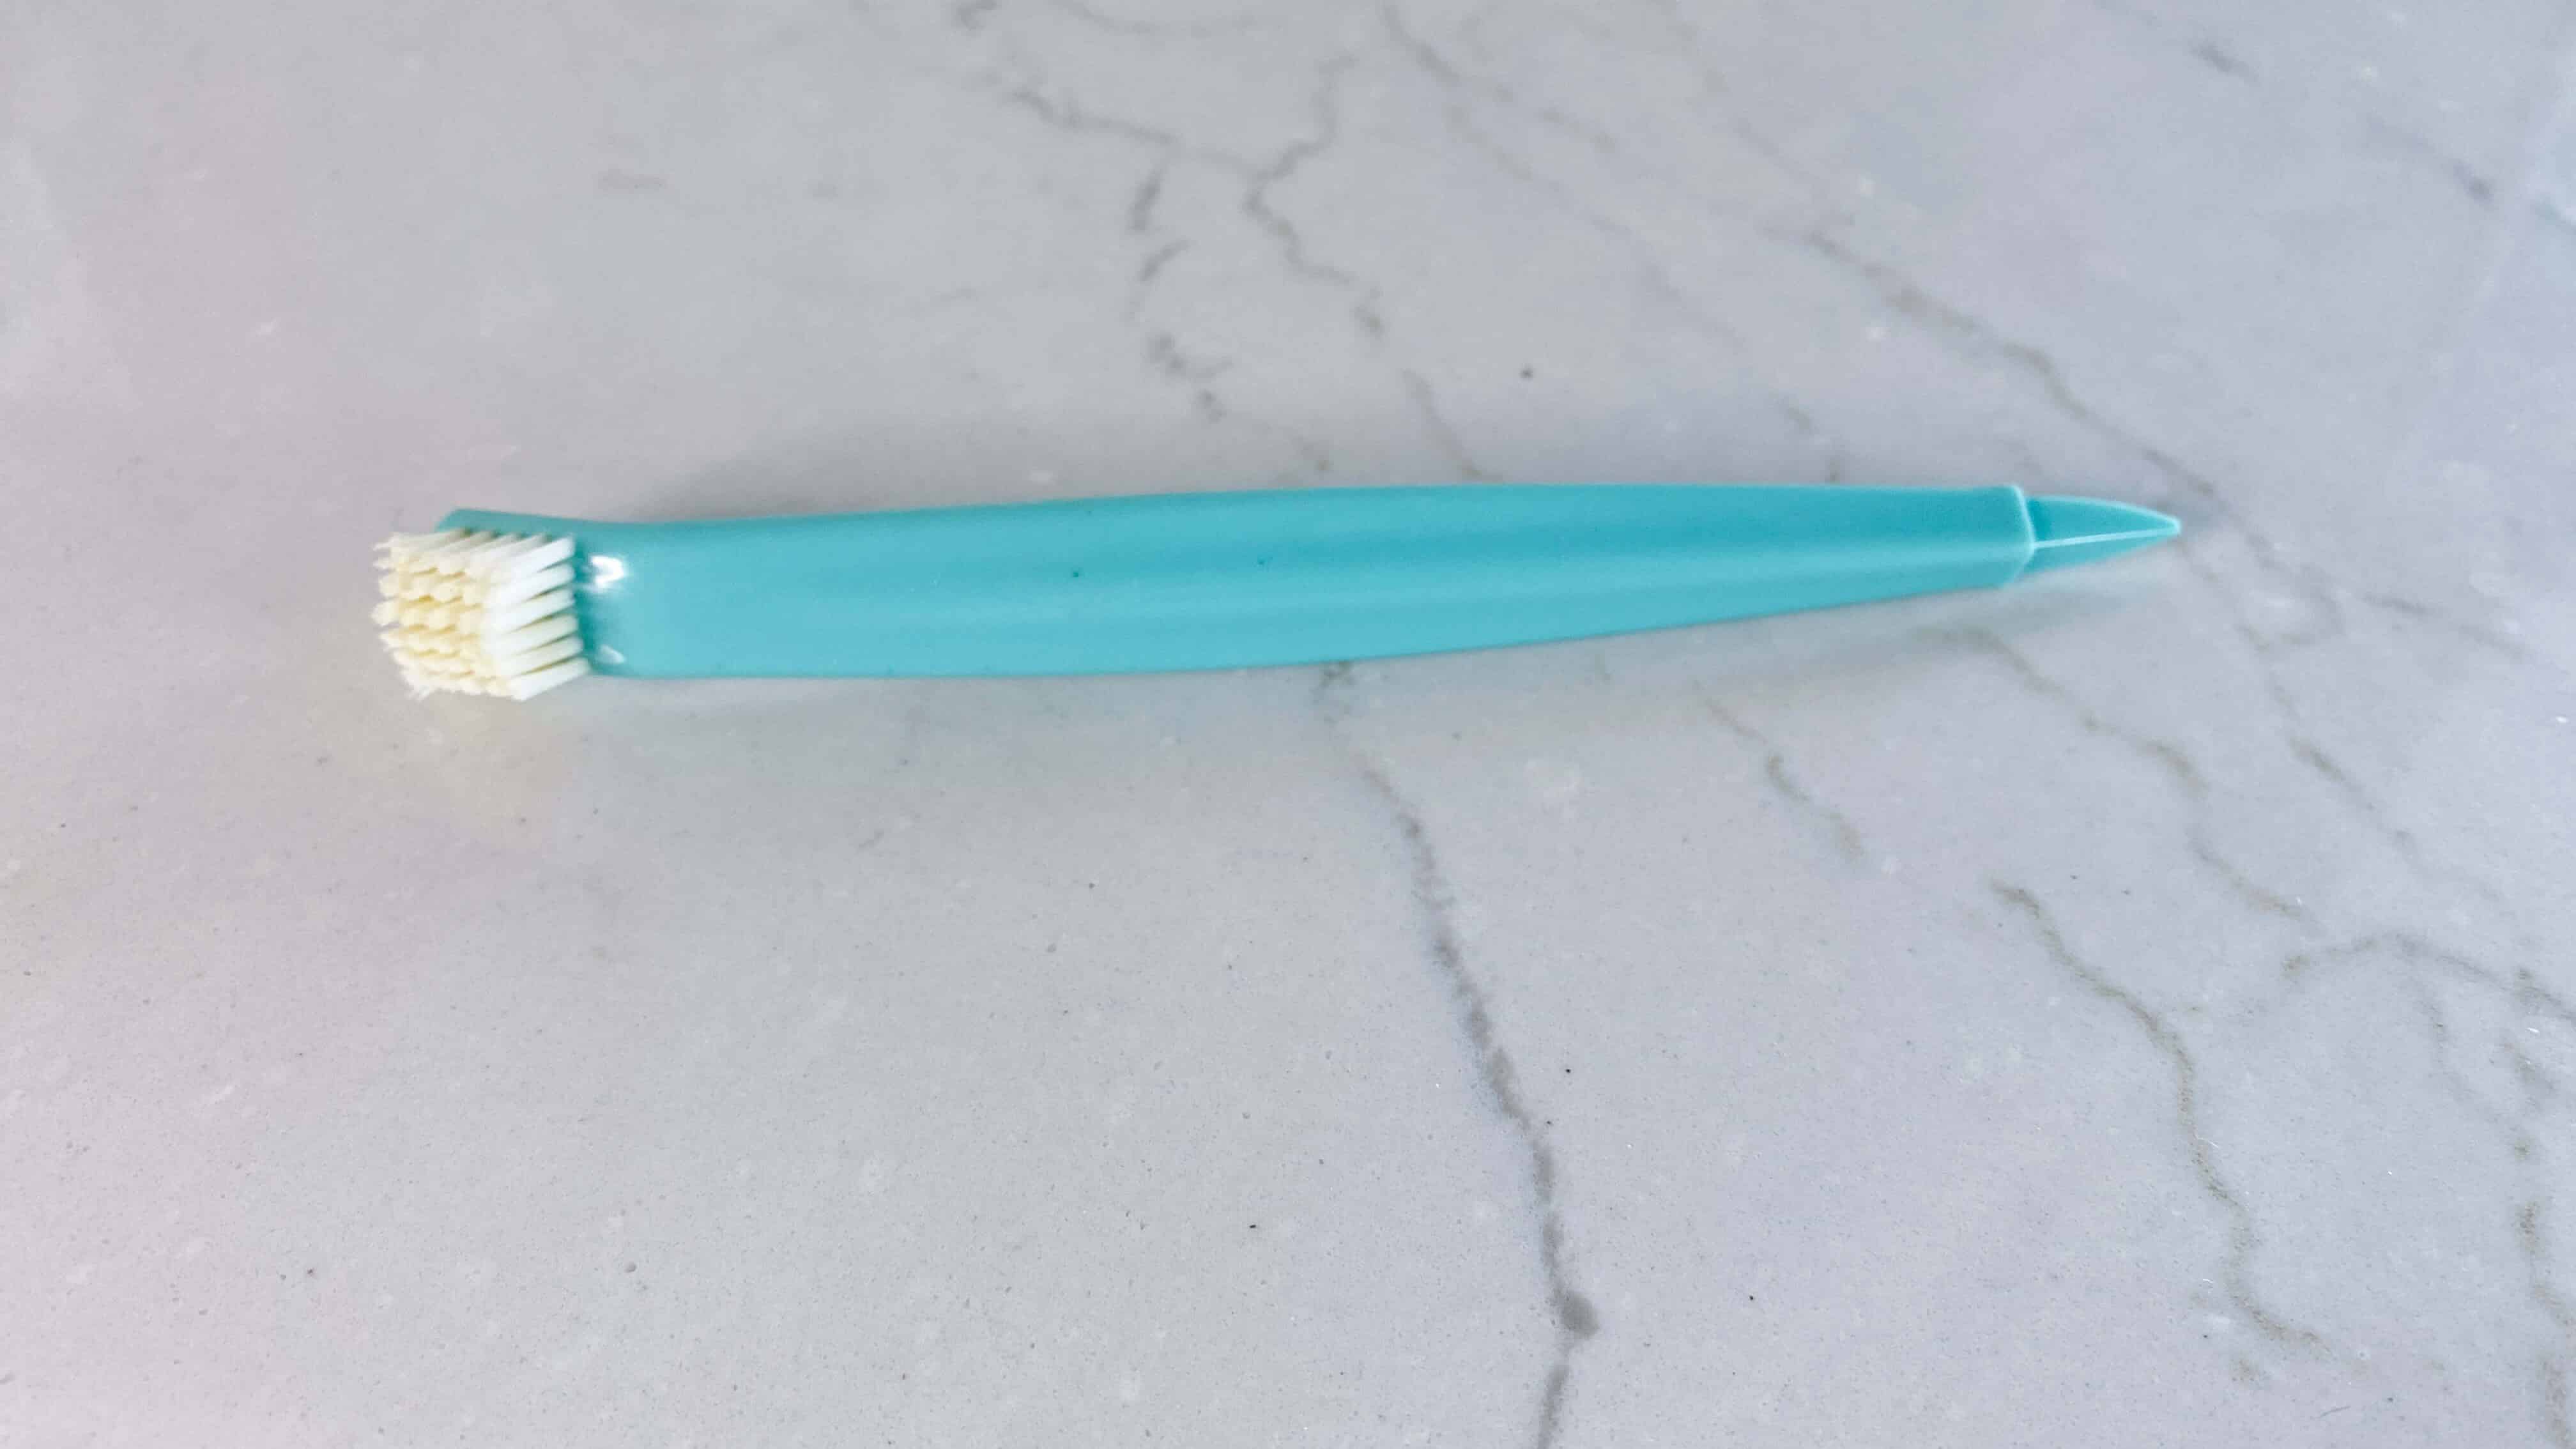 turquoise Bundt pan cleaning tool with dual brush on one end and point on other end